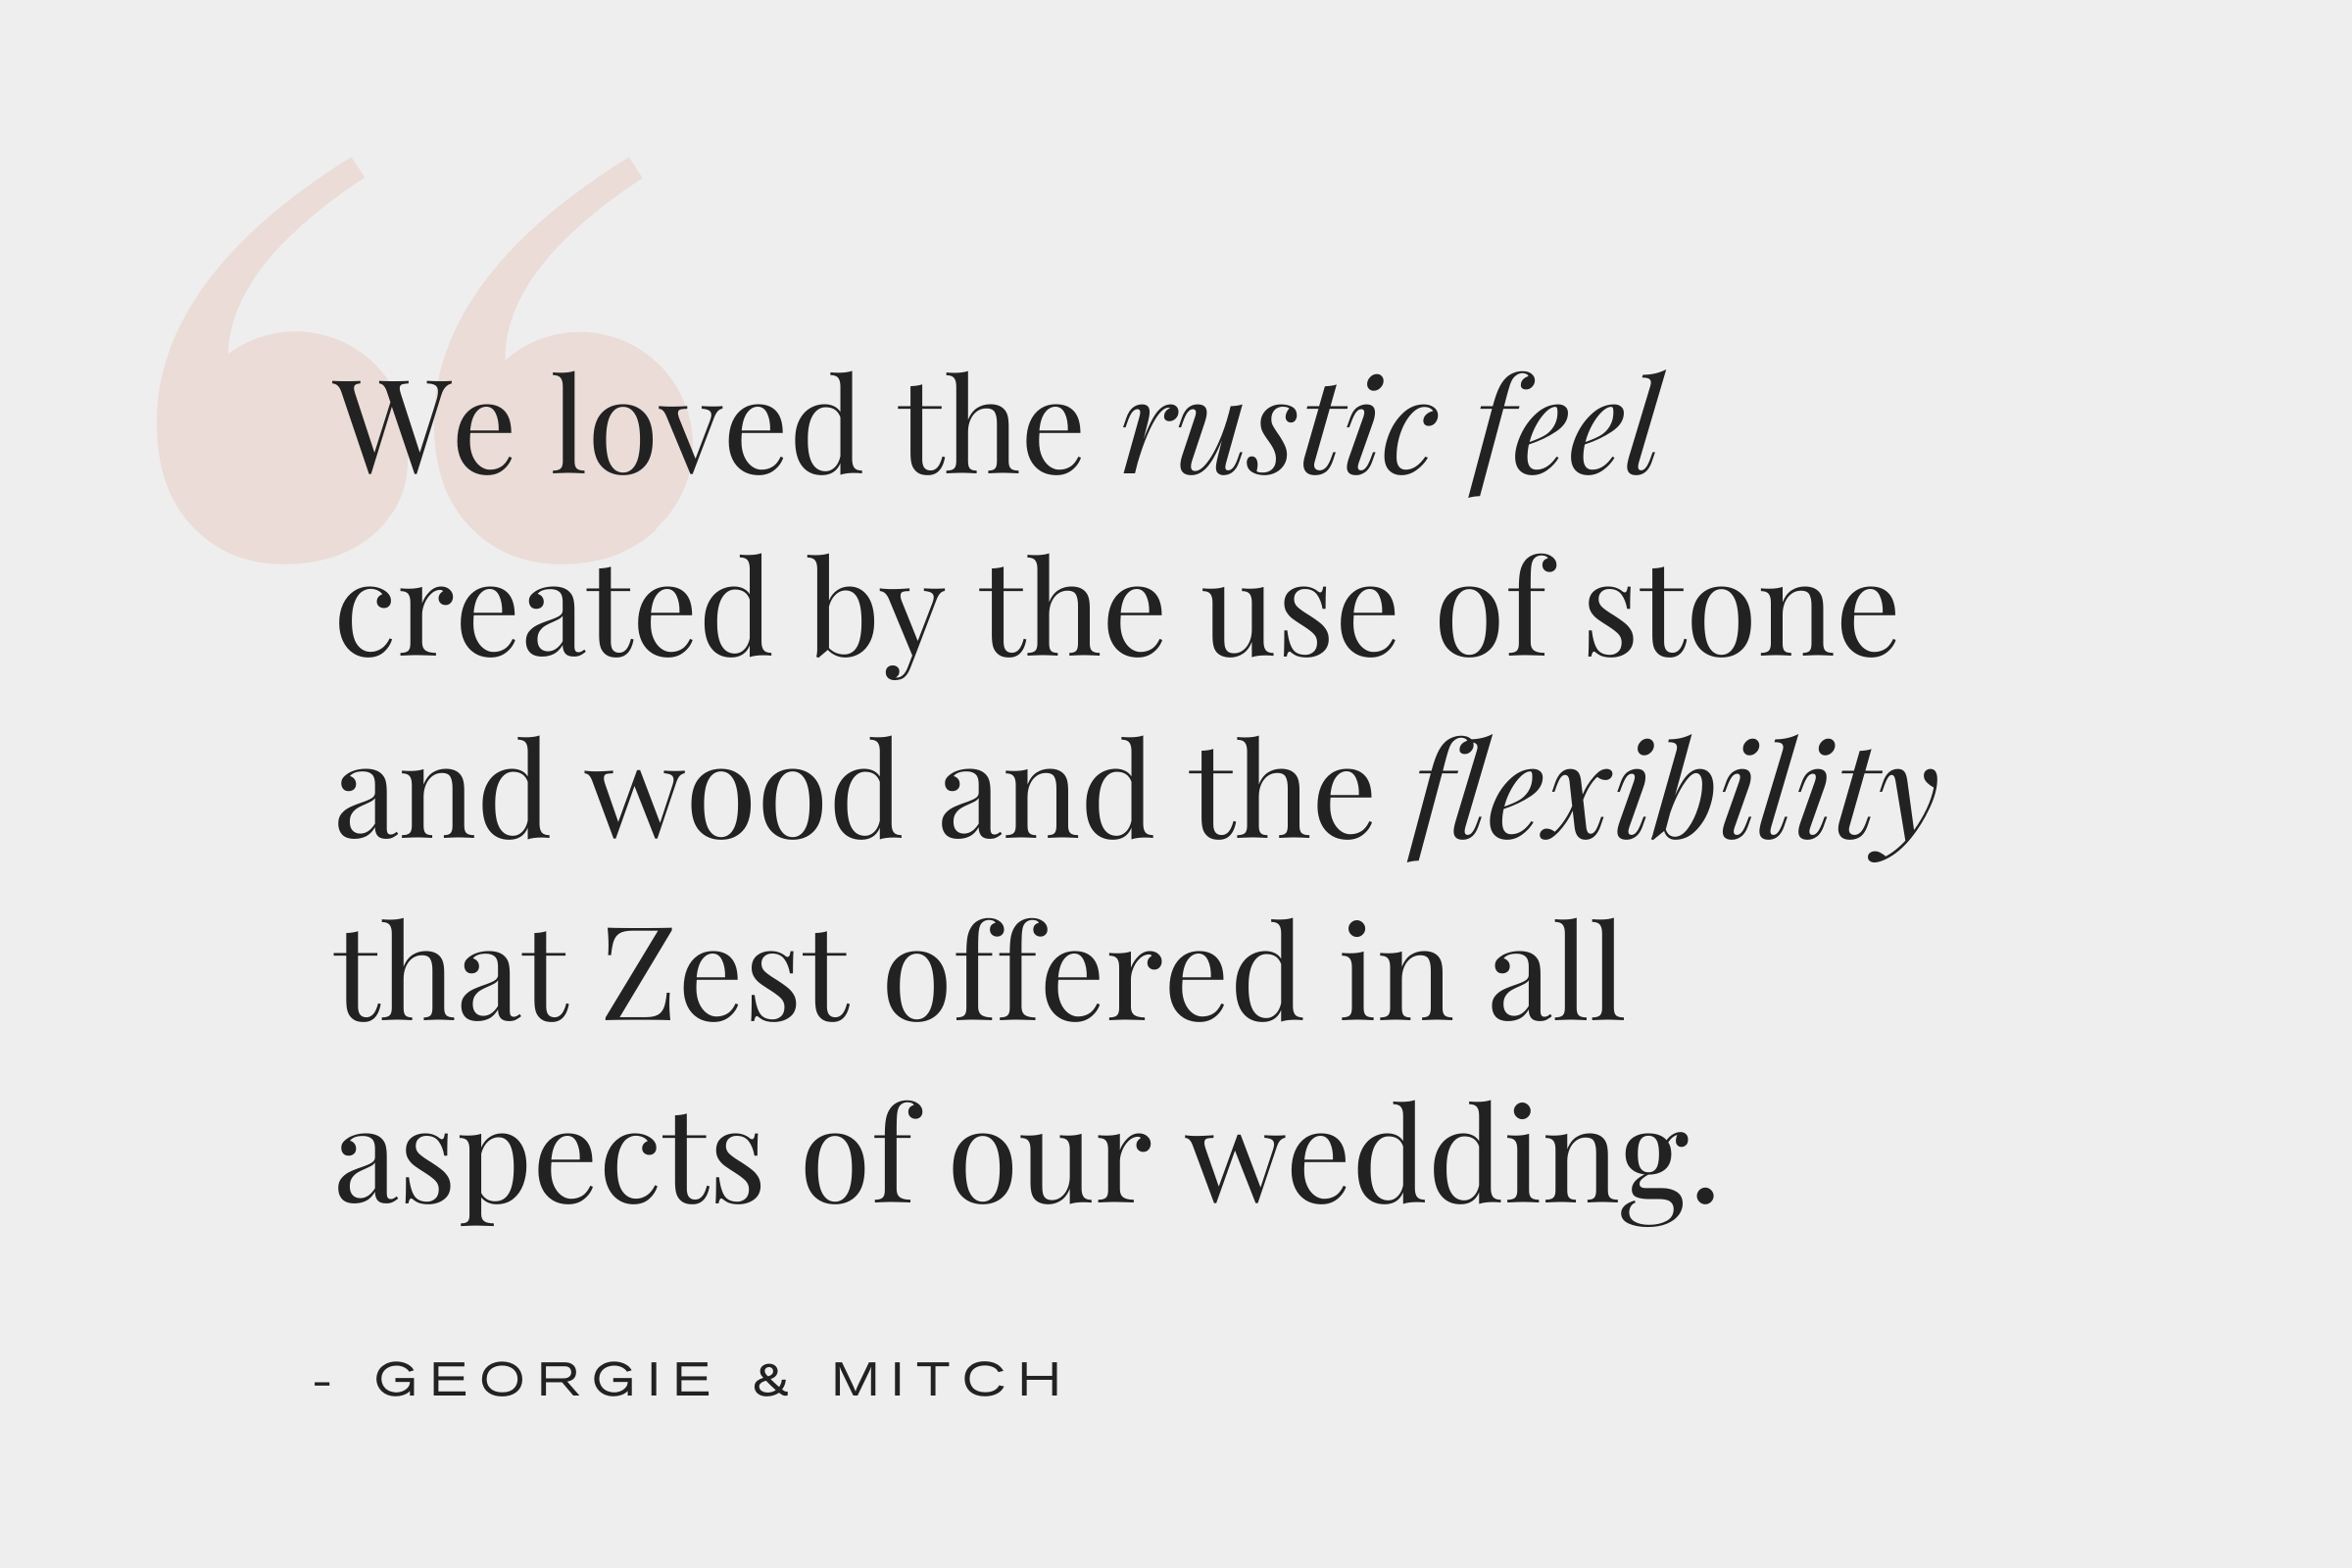 We loved the rustic feel created by the use of stone and wood and the flexibility that Zest offered in all aspects of our wedding